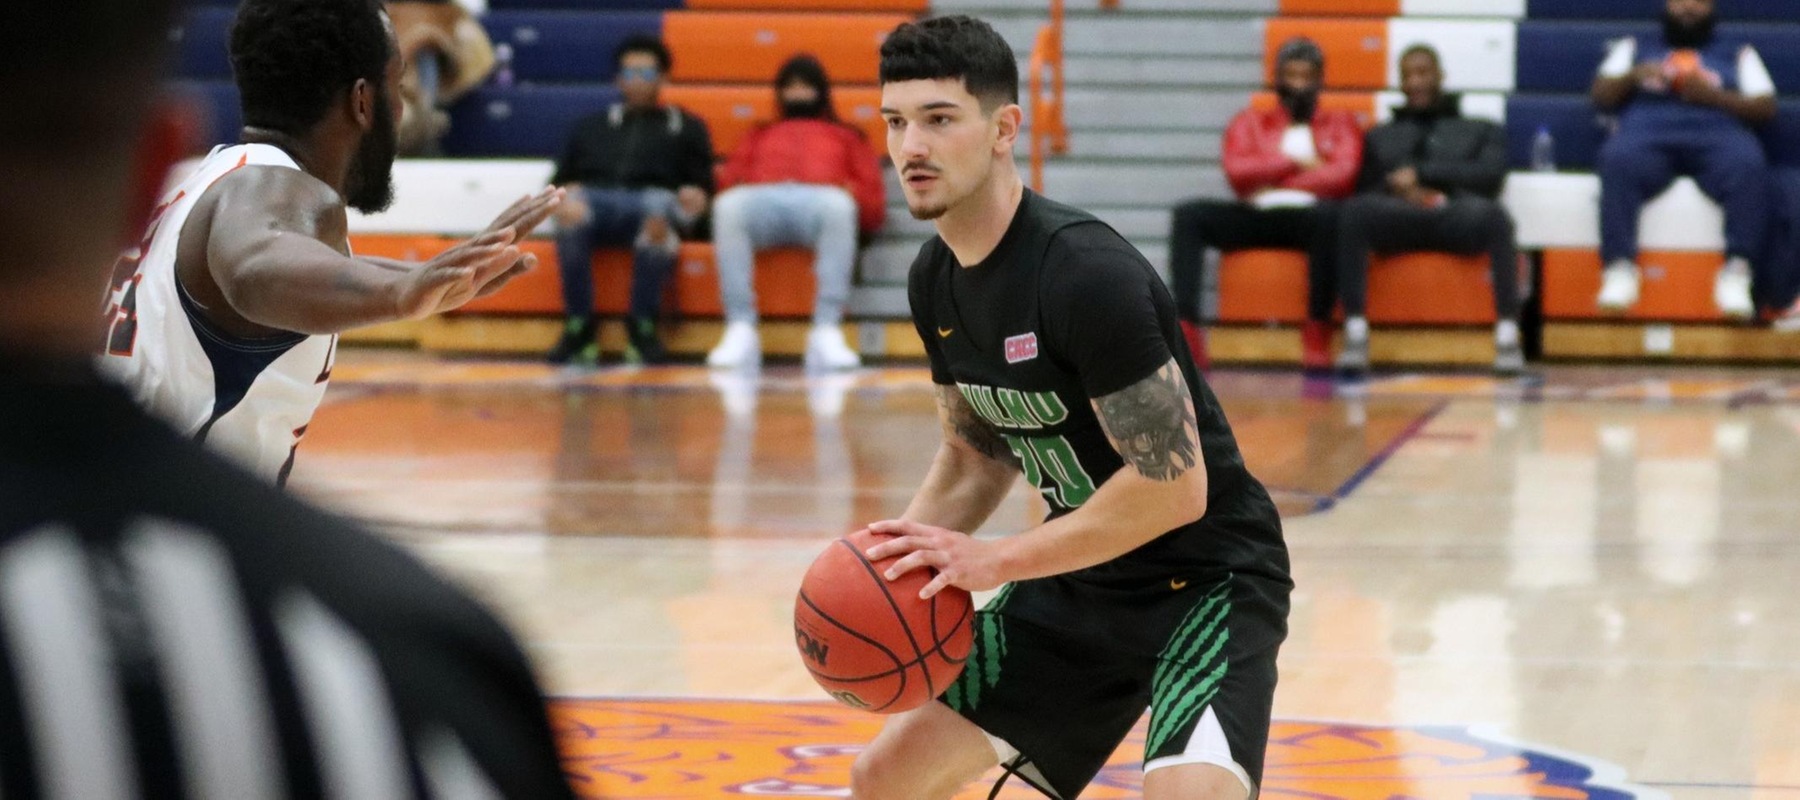 File photo of Danny Walsh who scored a career-high 29 points at Felician. Copyright 2021; Wilmington University. All rights reserved. Photo by Dan Lauletta. December 9 at Lincoln University (Pa.).